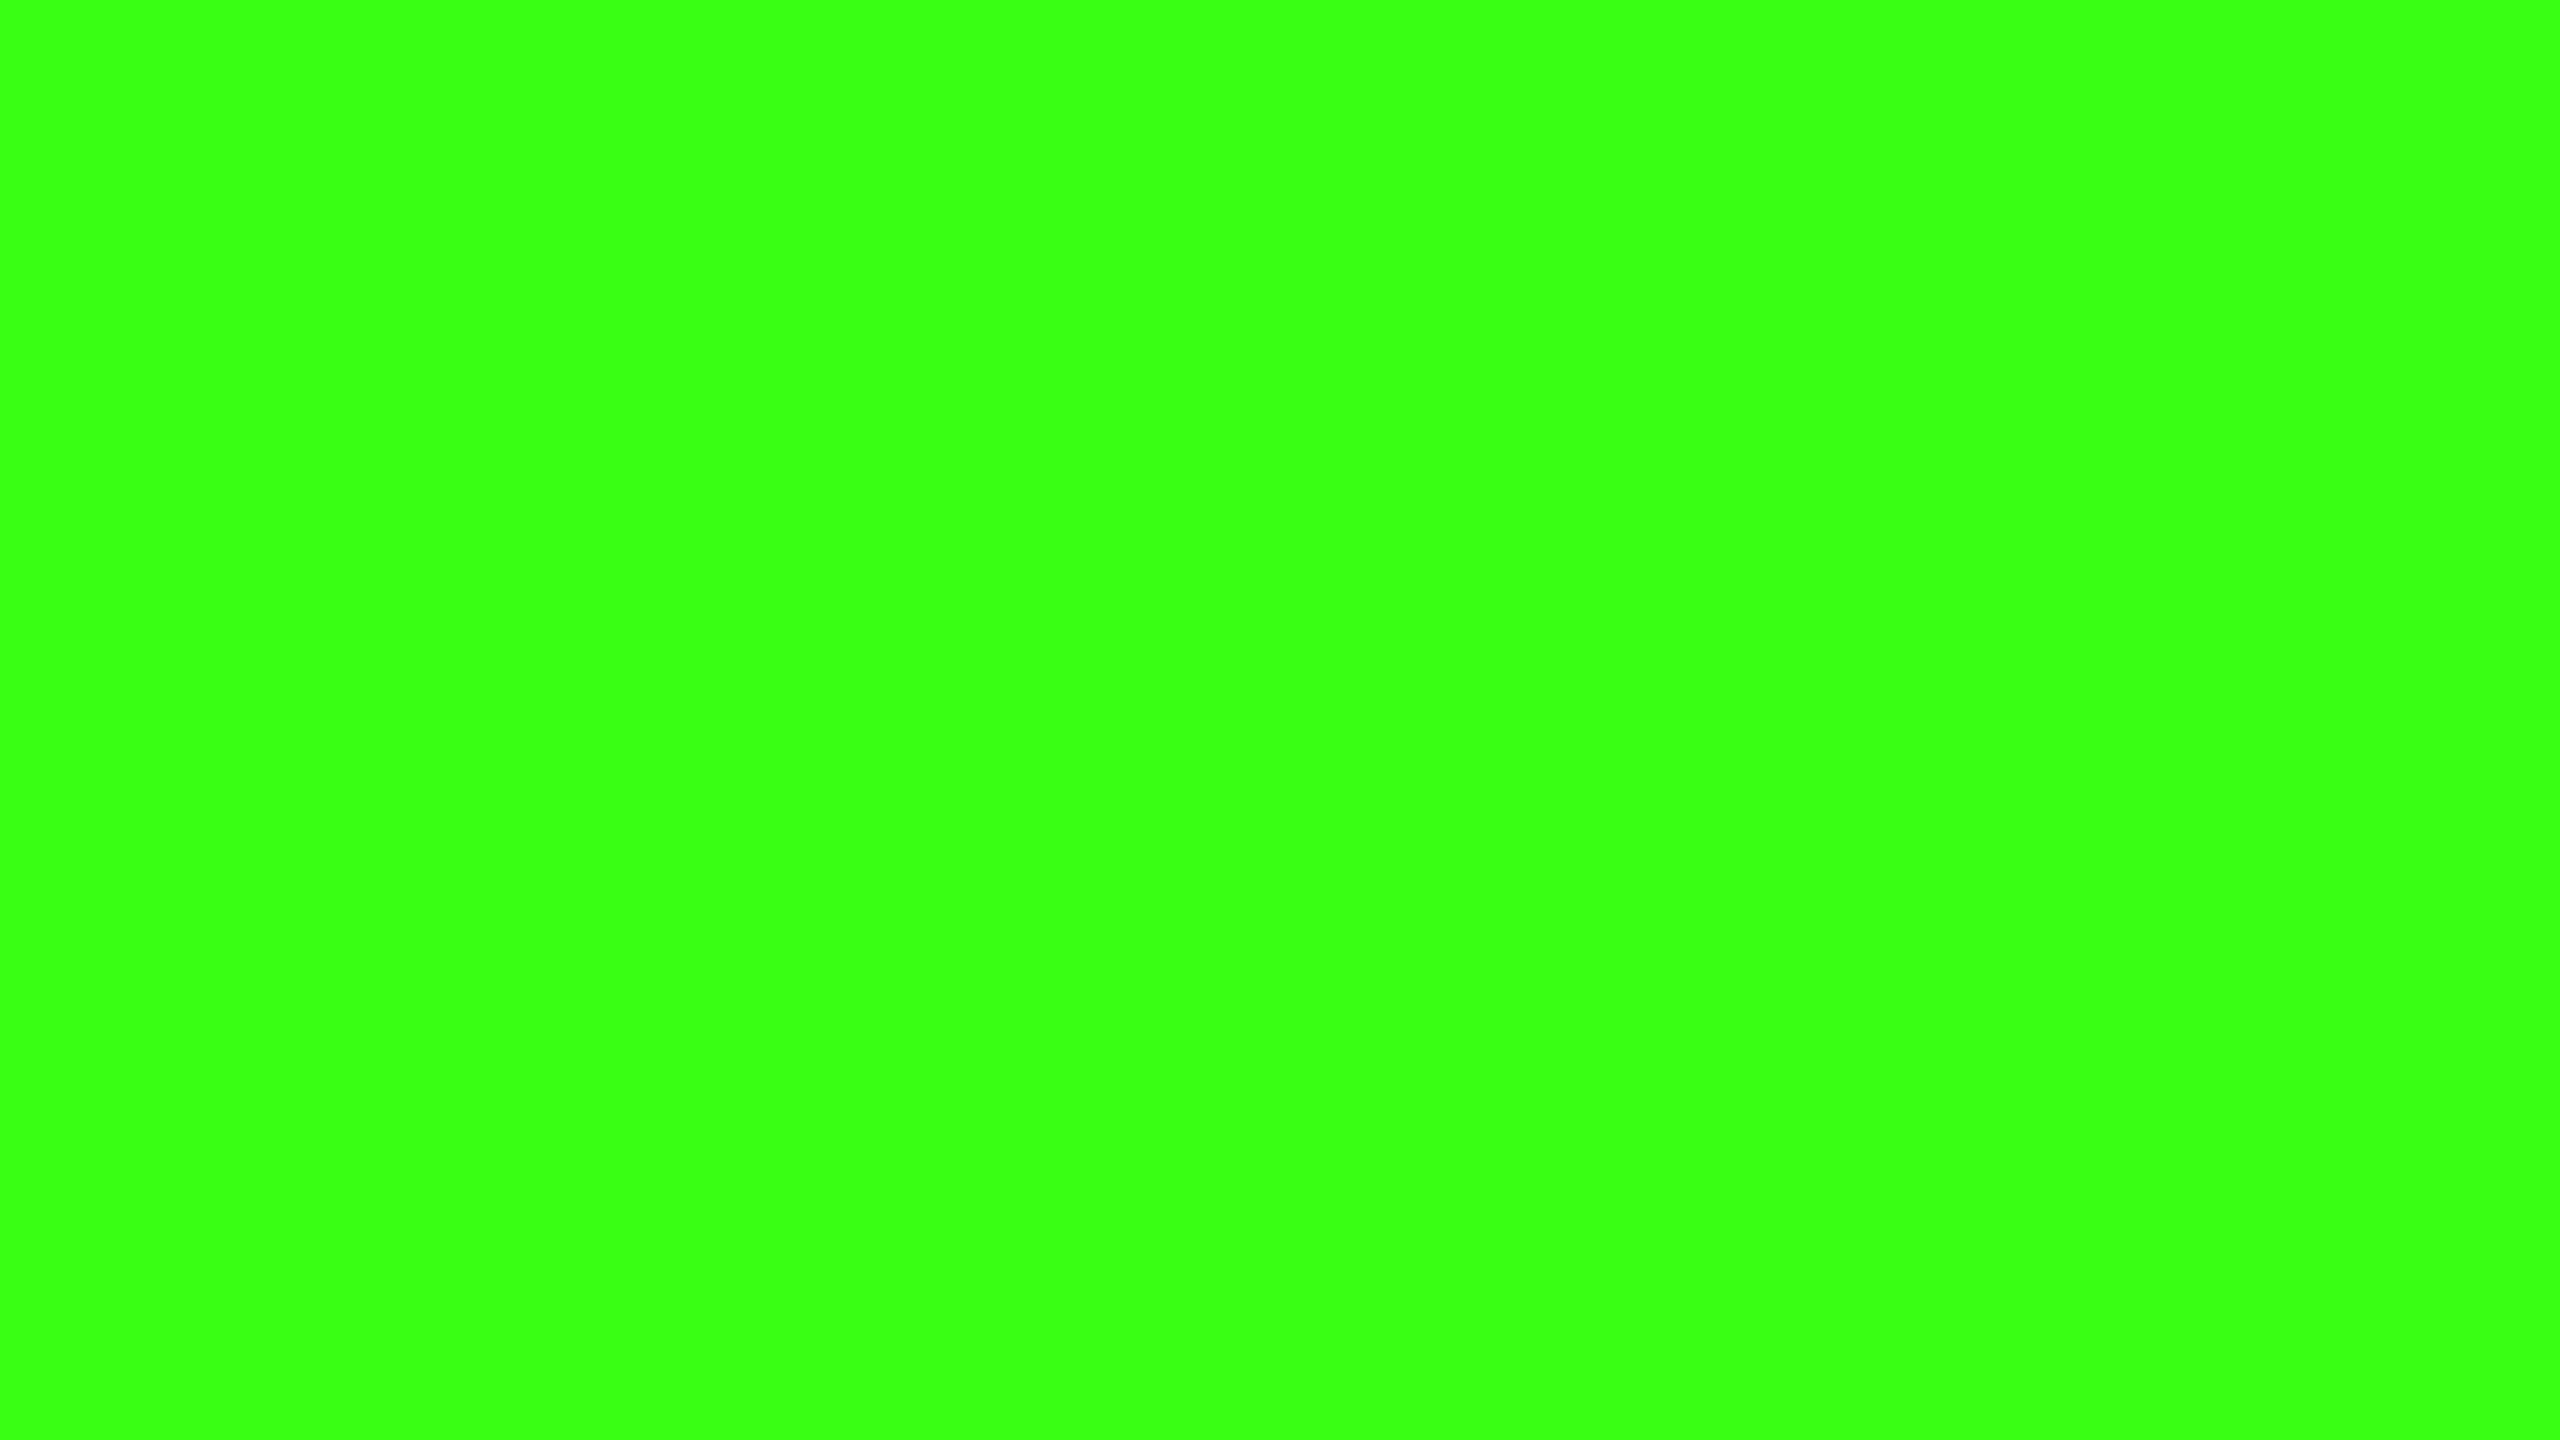 Neon green background pictures